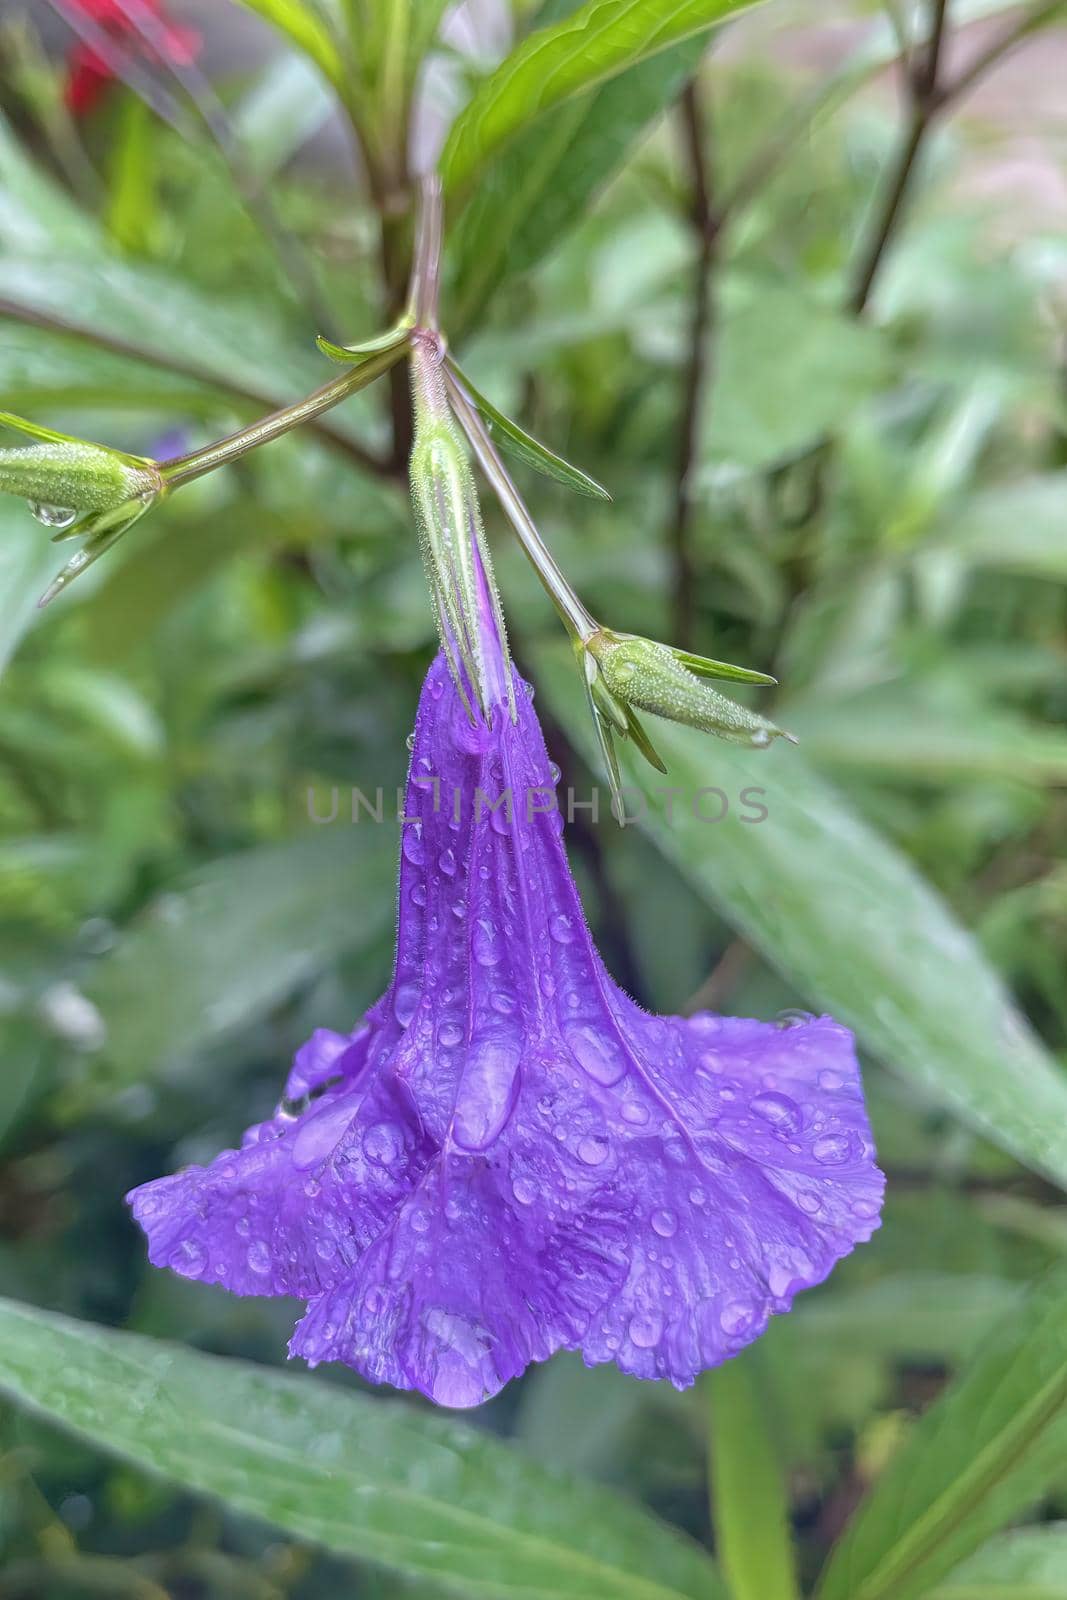 Ruellia is a genus of flowering plants commonly known as ruellias or wild petunias